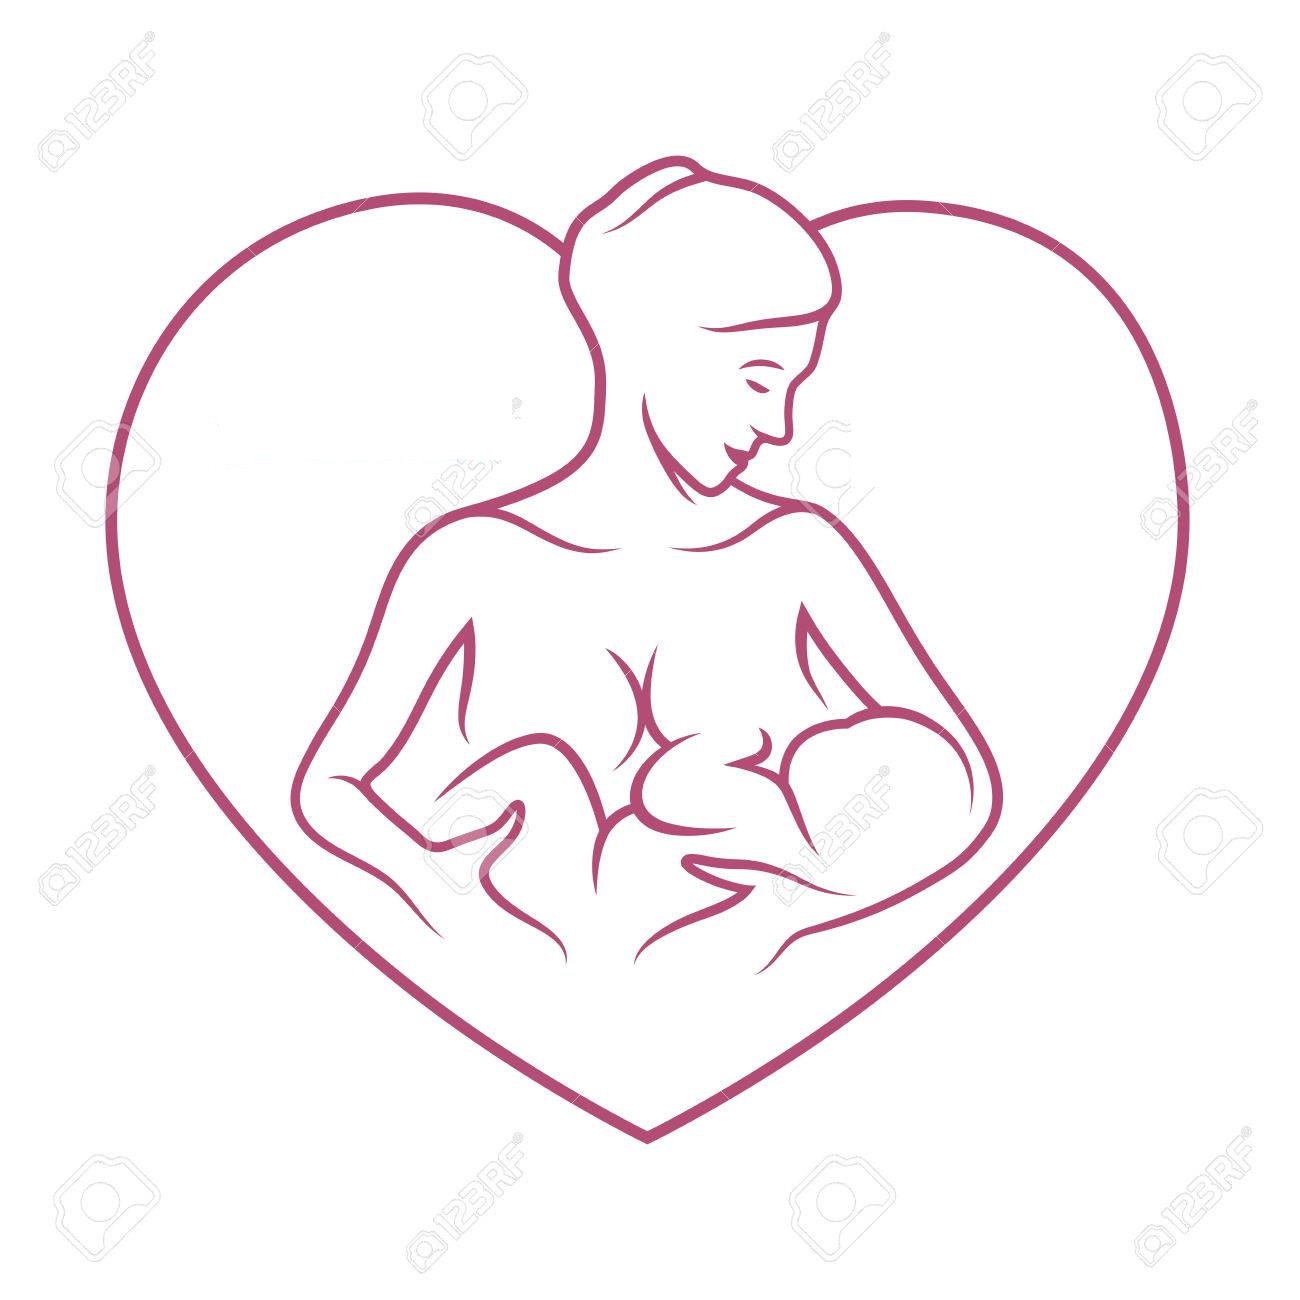 Outline of a breastfeeding woman, in pink